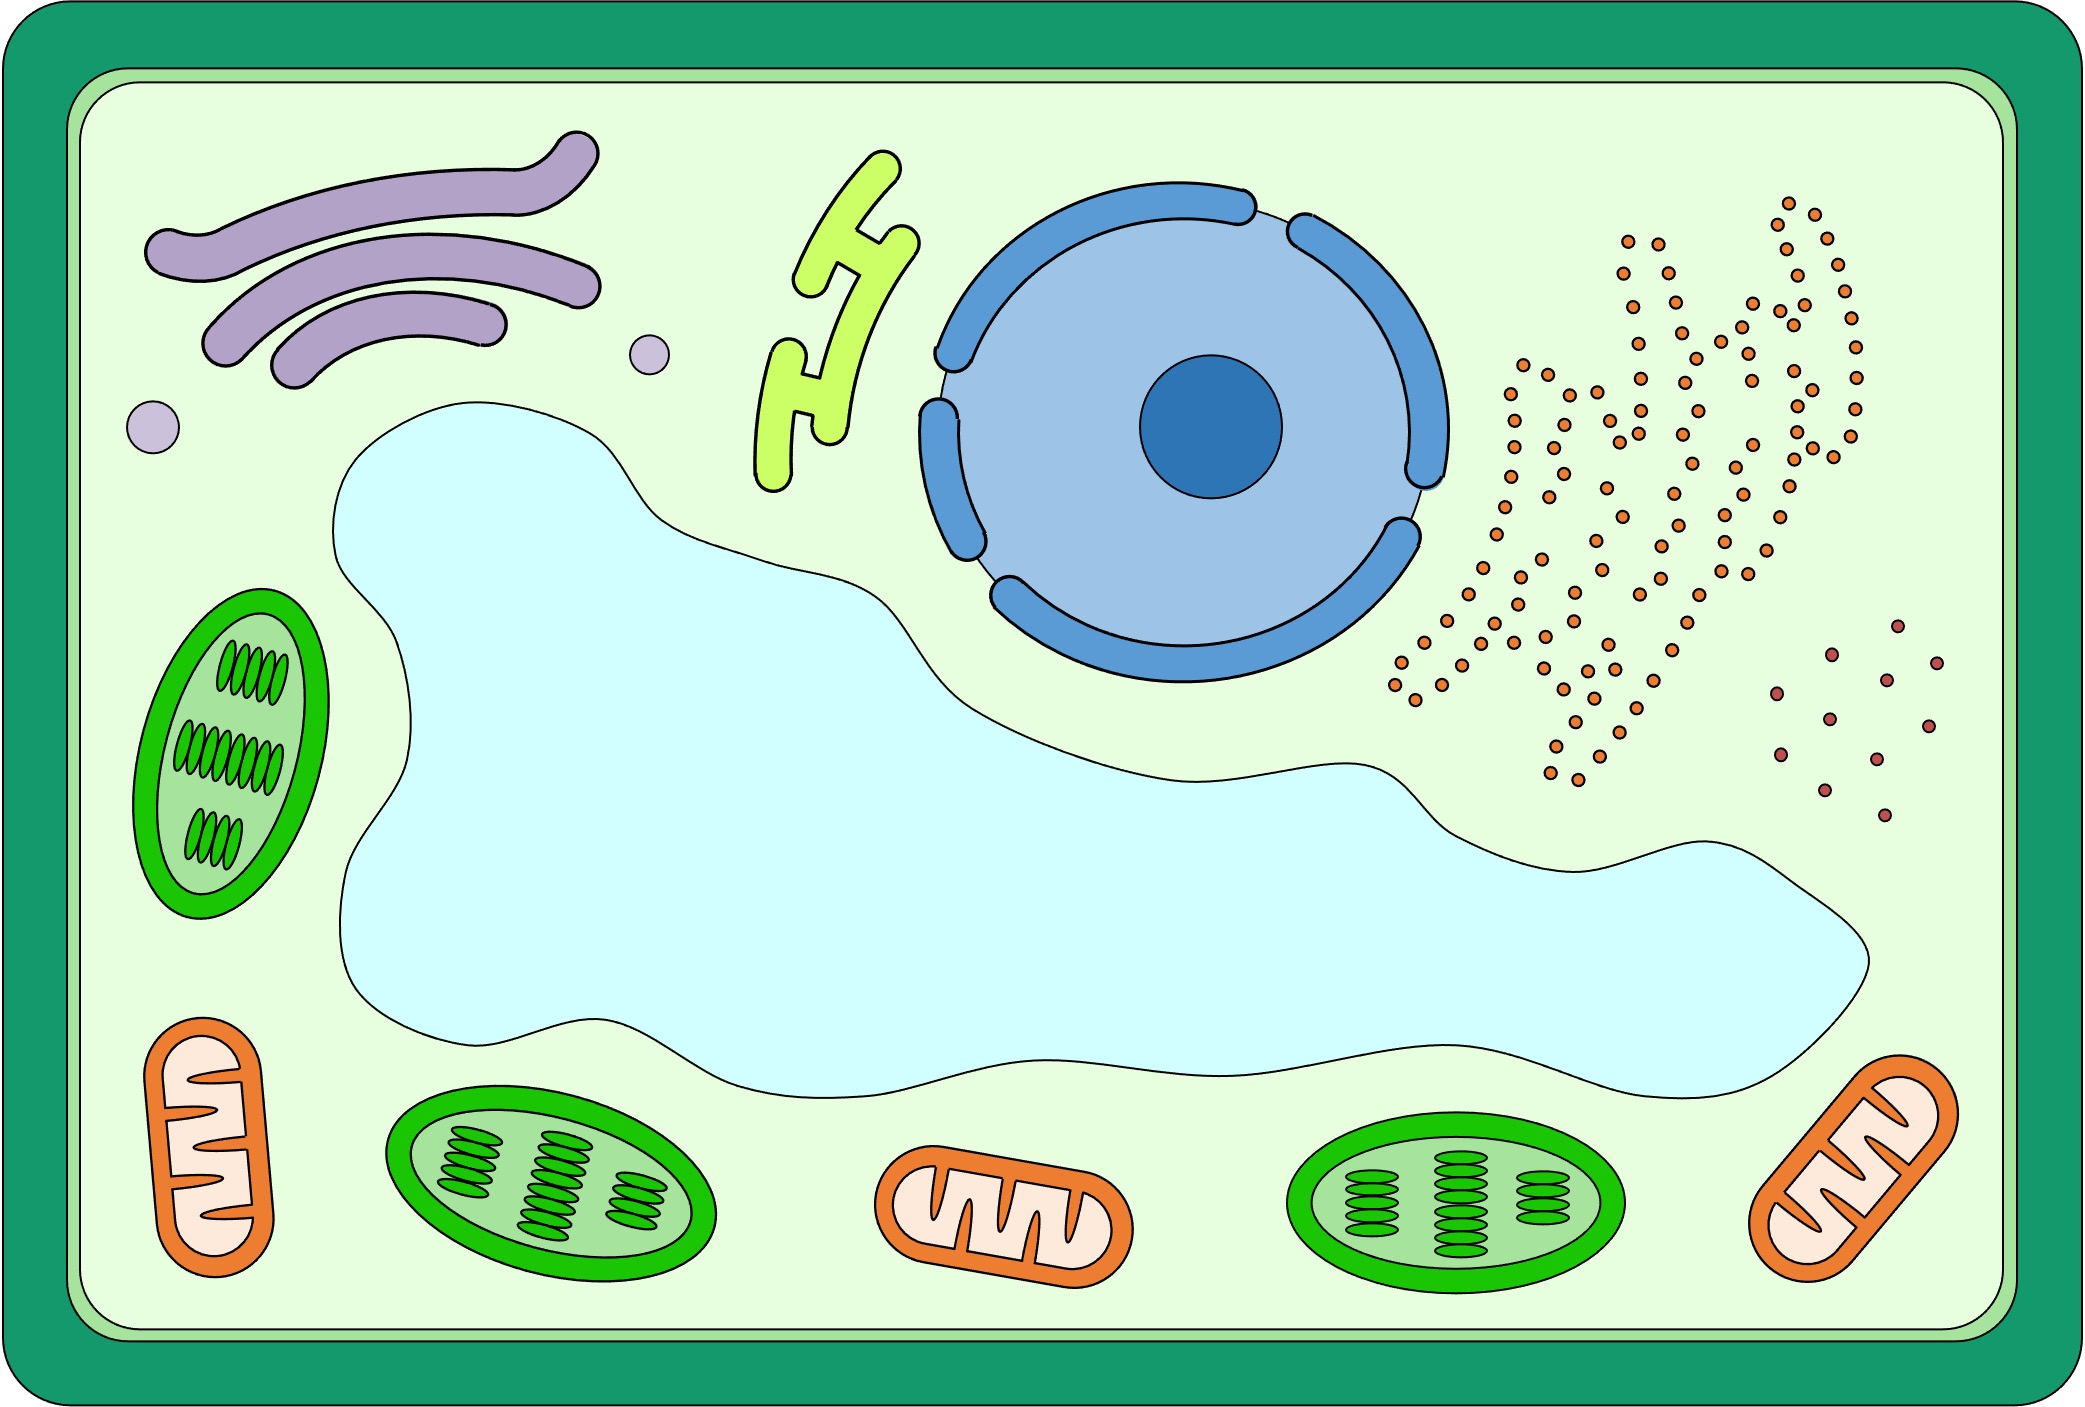 Plant cell, drawing - Stock Image - C021/4510 - Science Photo Library